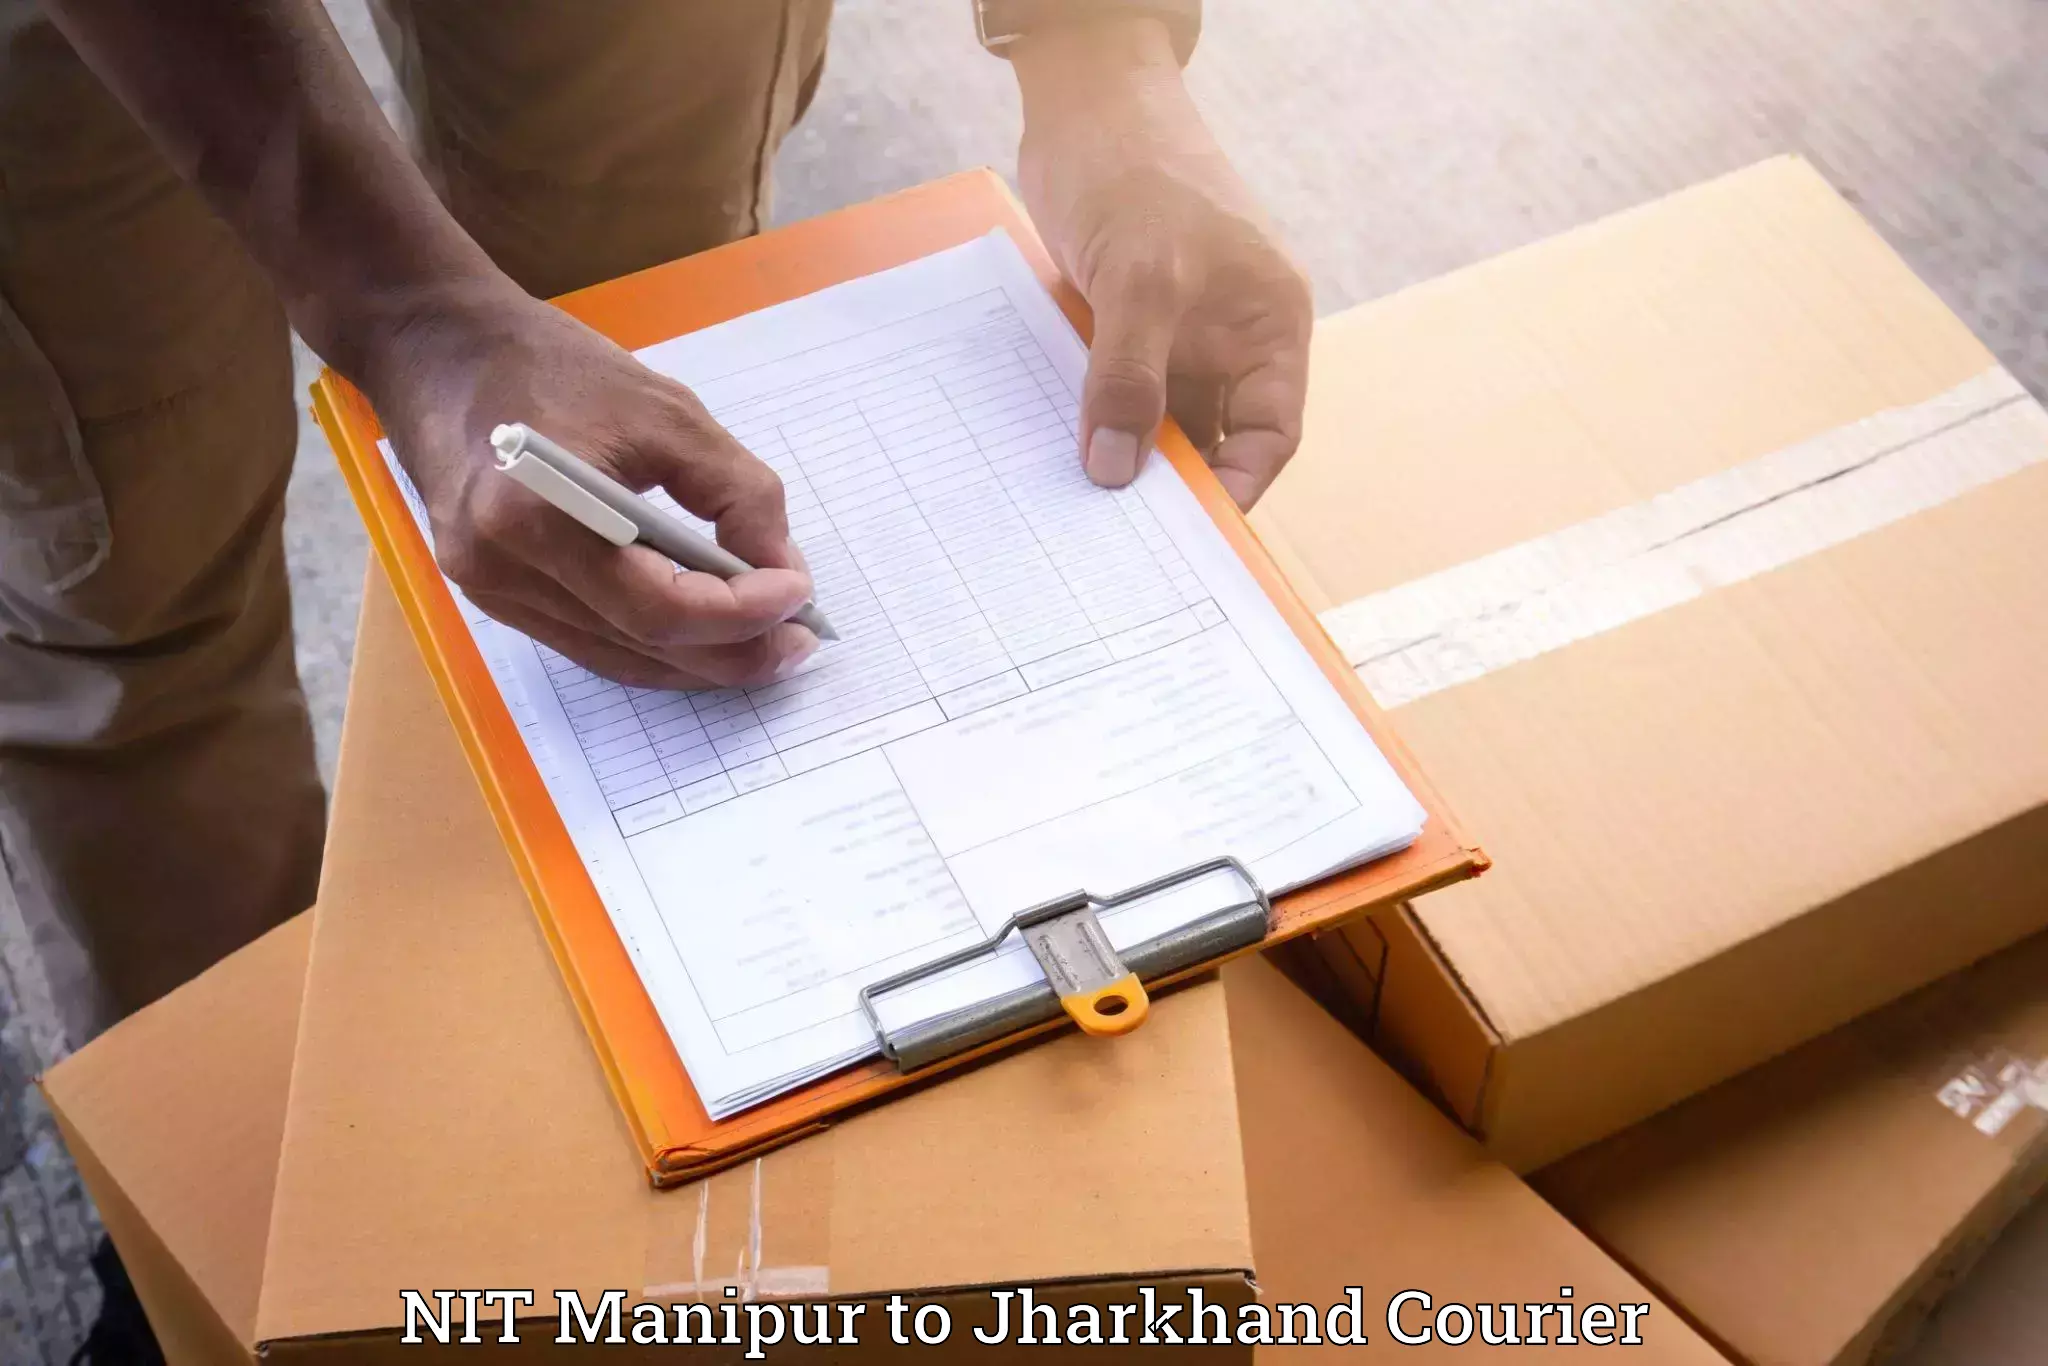 Professional relocation services NIT Manipur to Jamshedpur